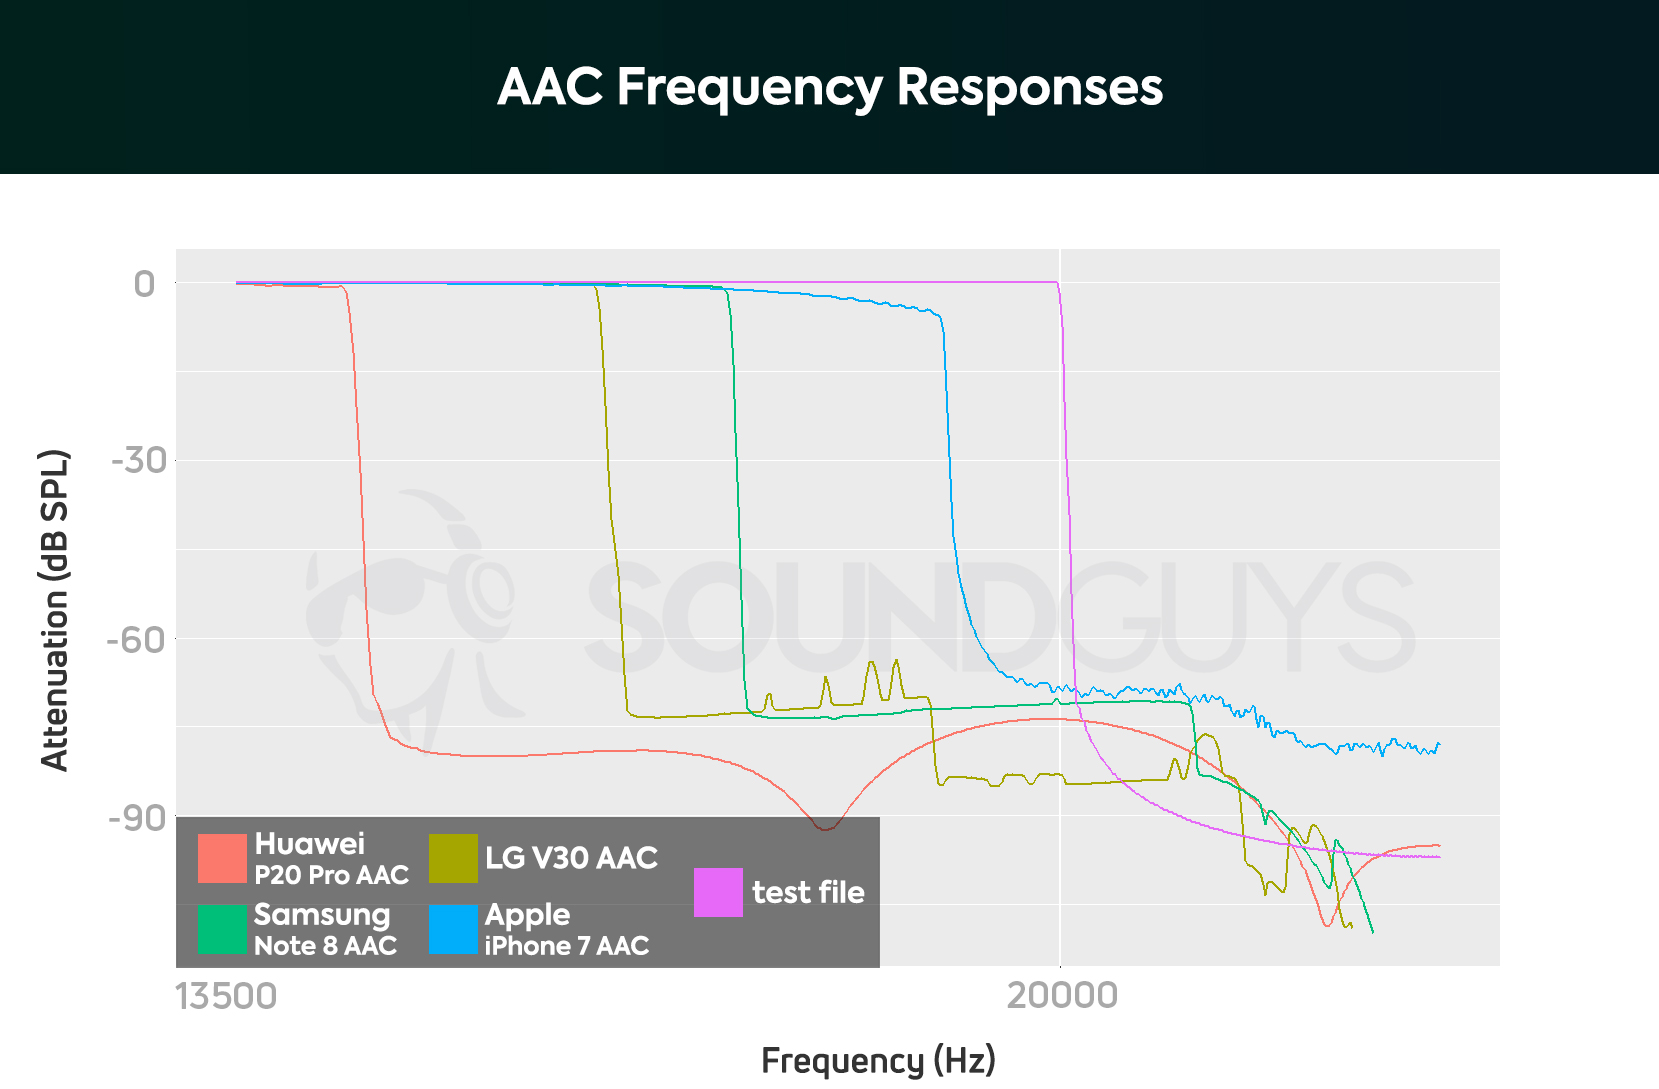 Best wireless headphones: A chart showing the AAC Bluetooth codec's performance on the Huawei P20 Pro, Samsung Galaxy Note 8, LG V30, and Apple iPhone 7.